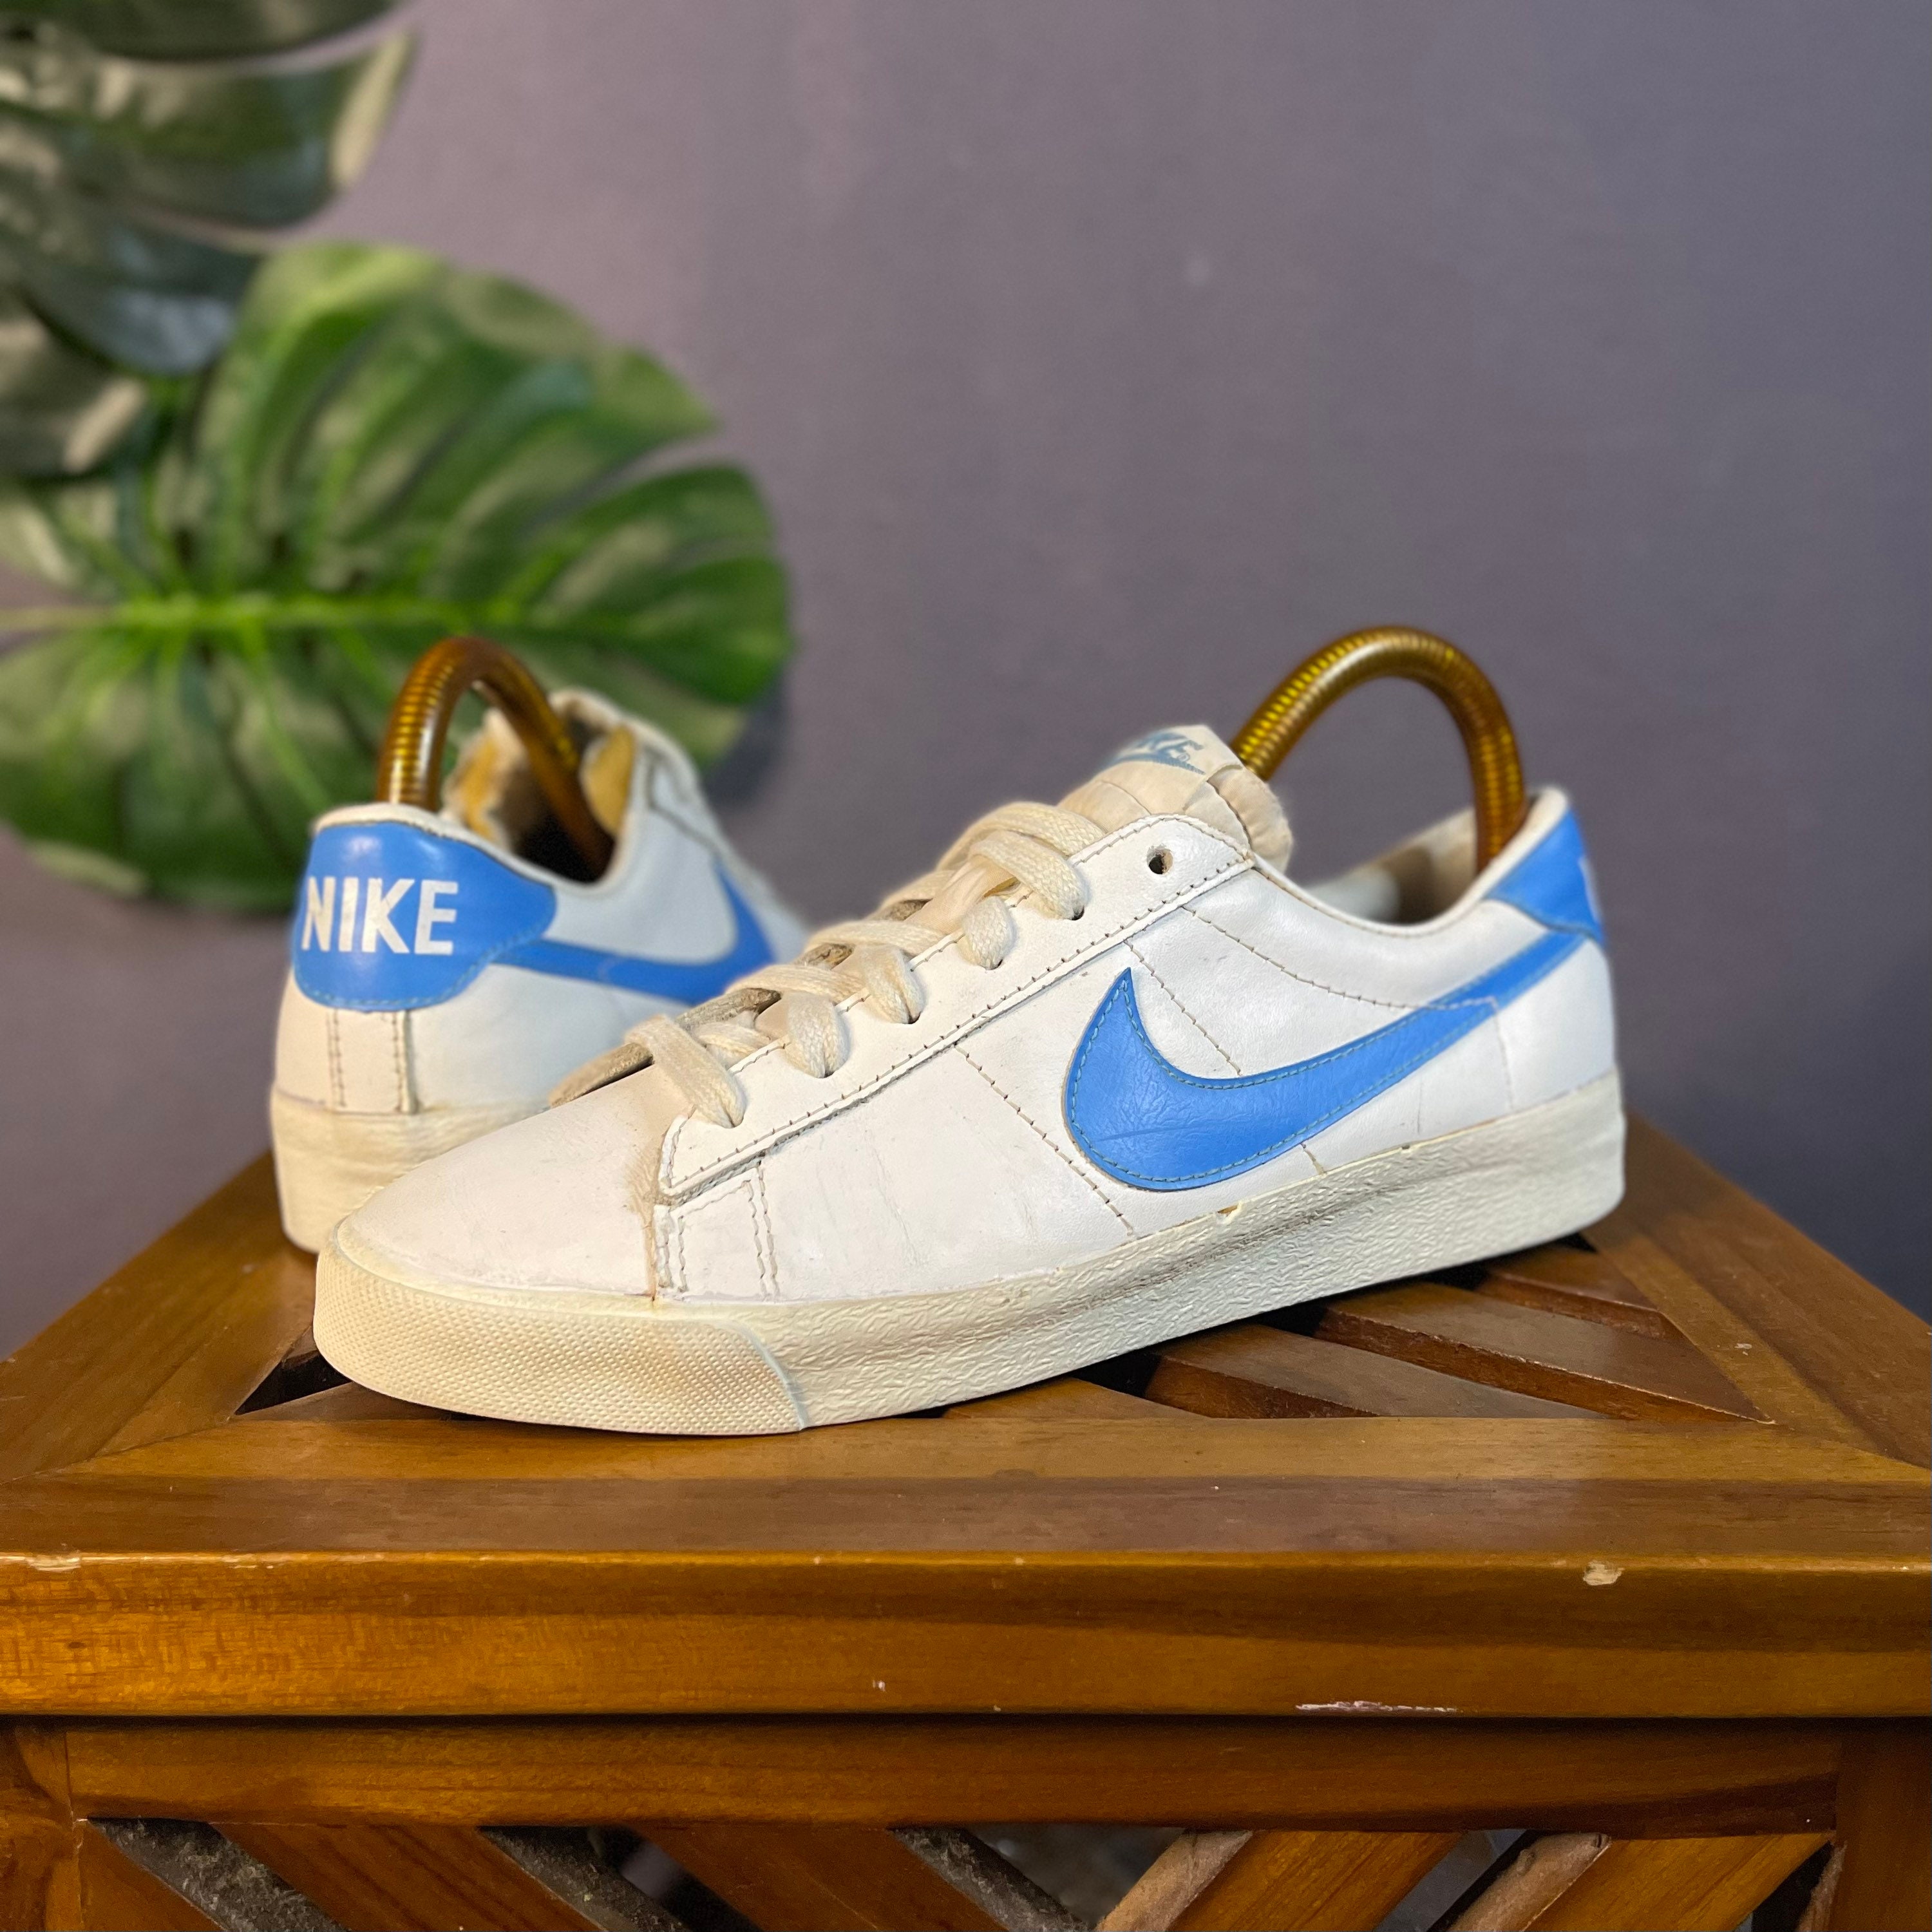 Vintage Nike Made in 1980s - Etsy